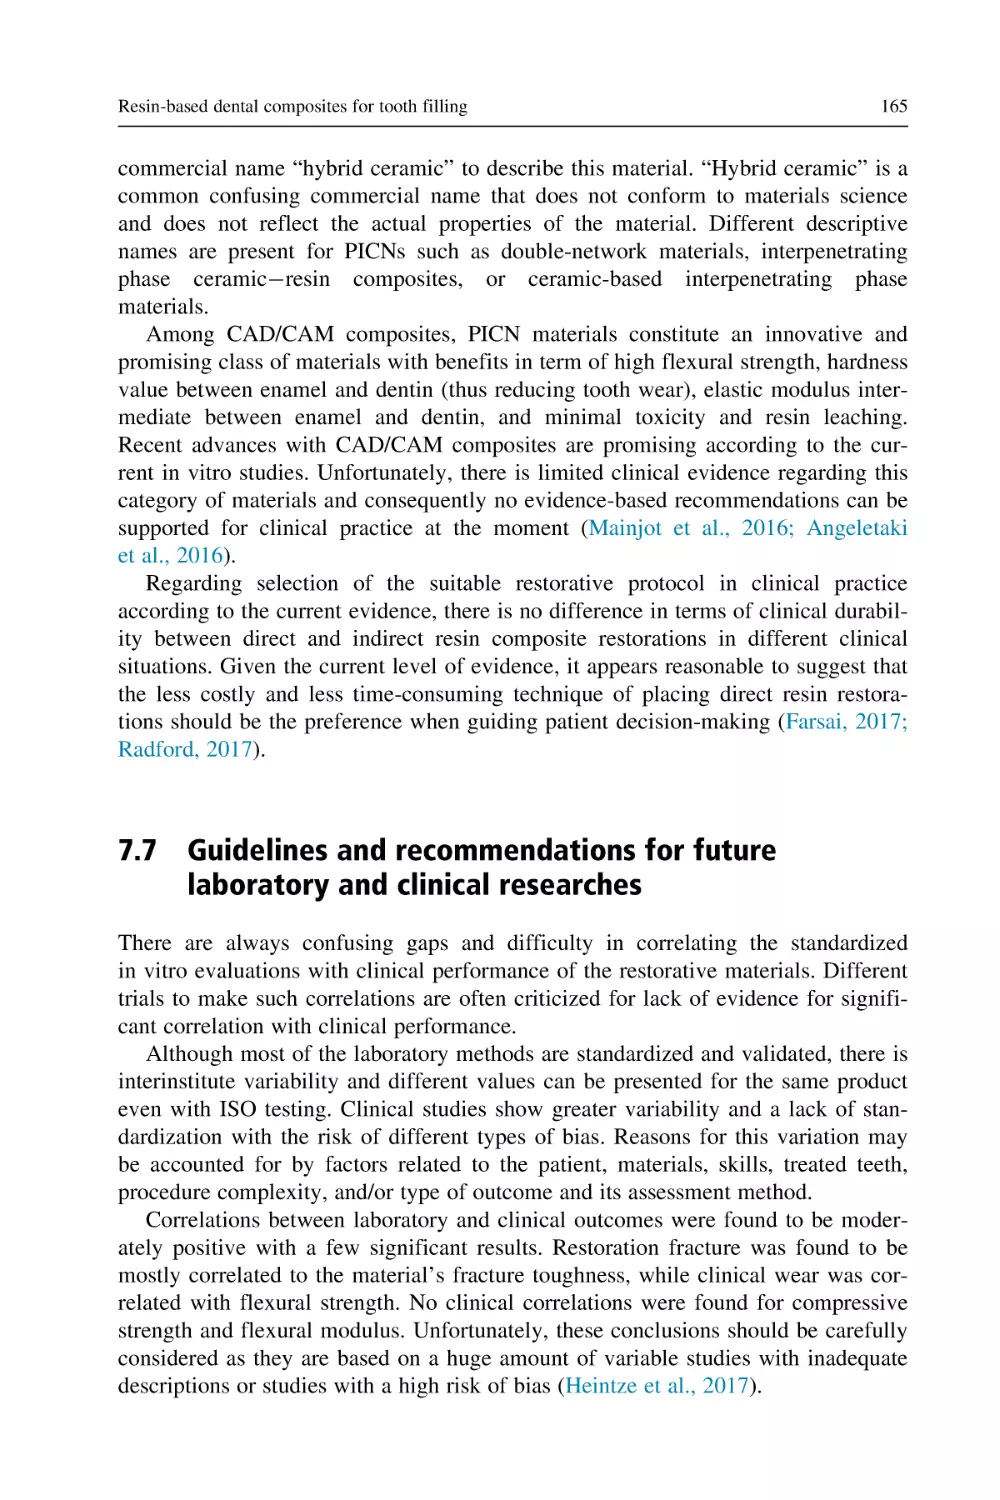 7.7 Guidelines and recommendations for future laboratory and clinical researches